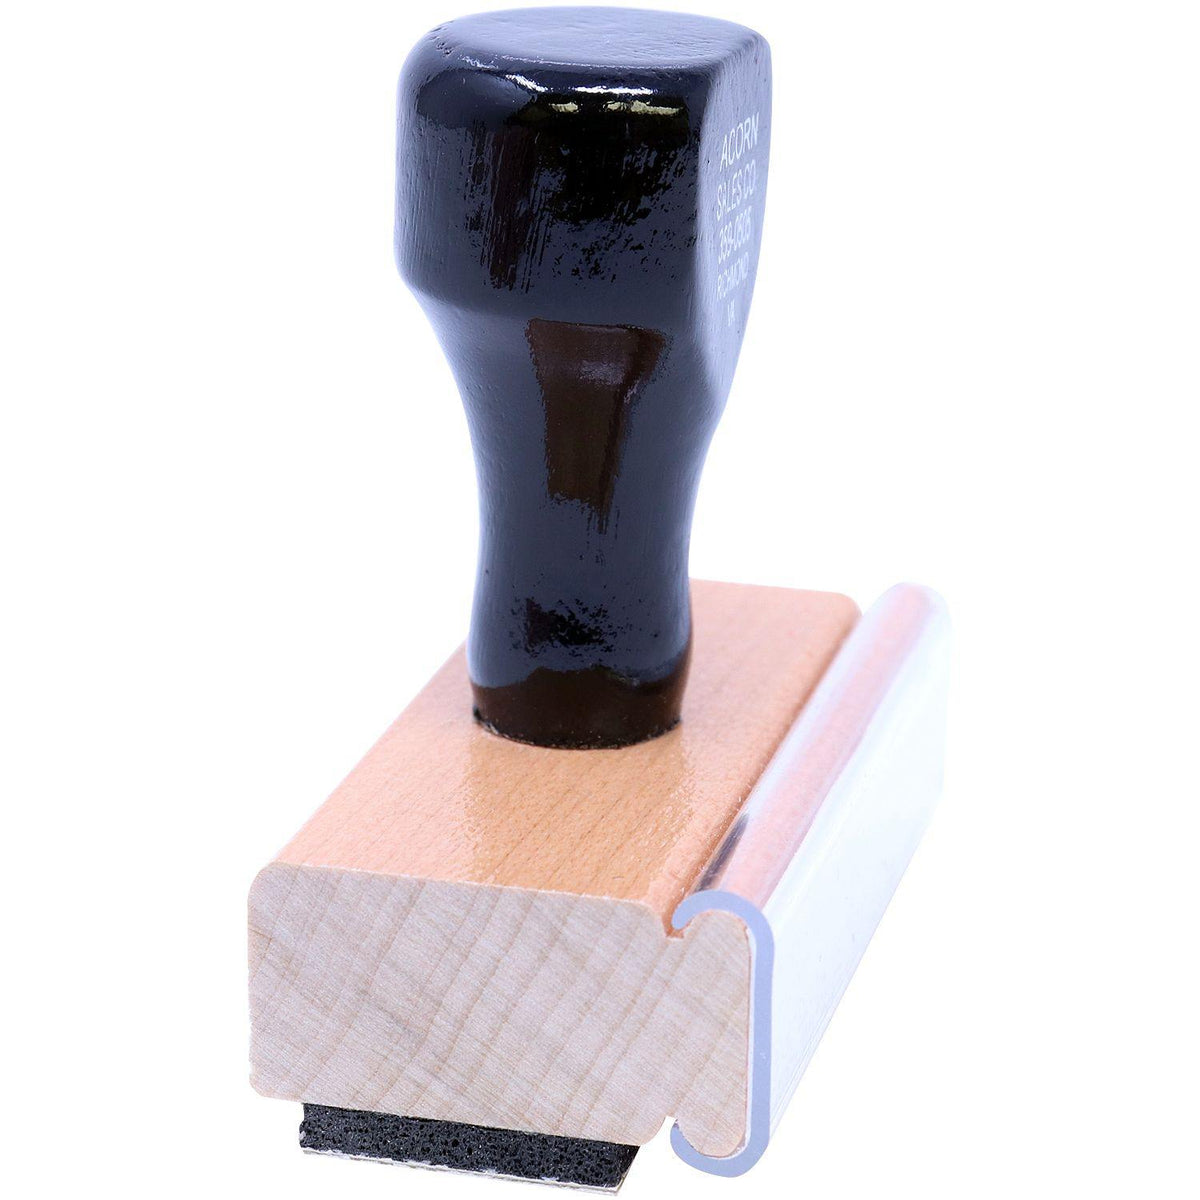 Side View of Application Complete Rubber Stamp at an Angle